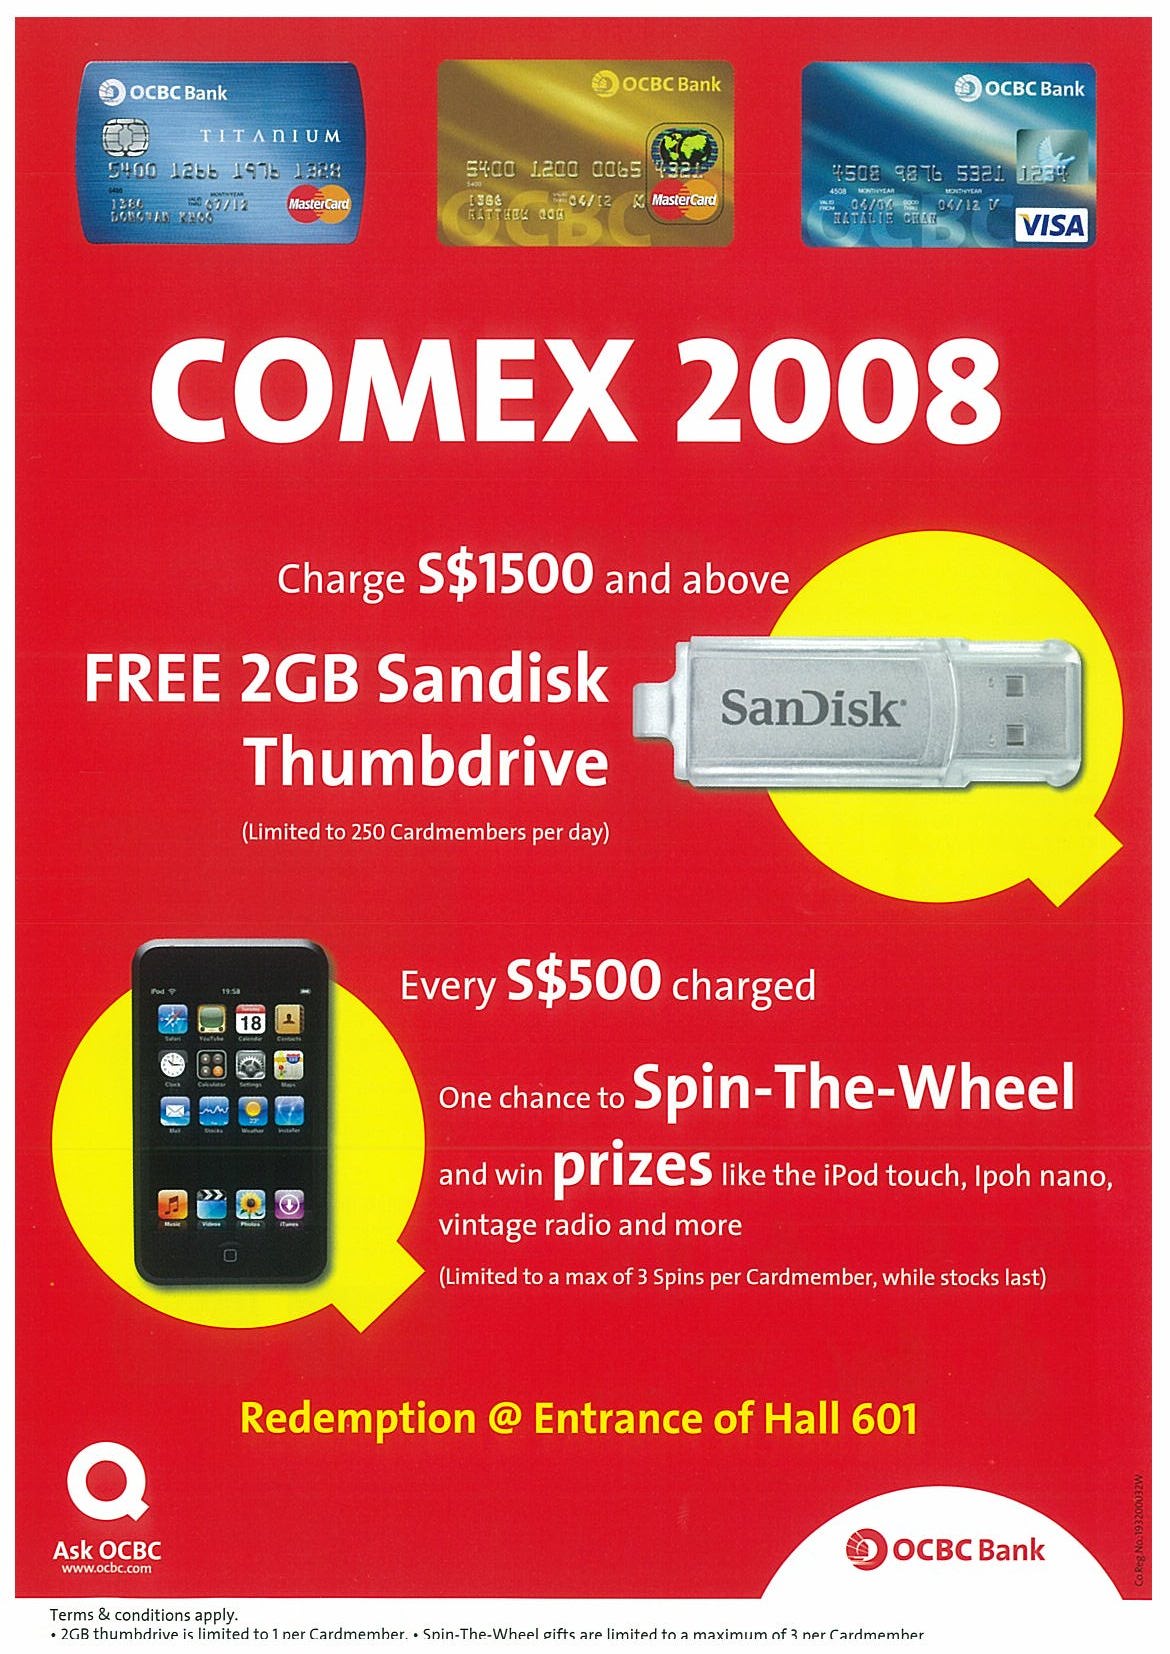 Comex 2008 price list image brochure of OCBC Page 1